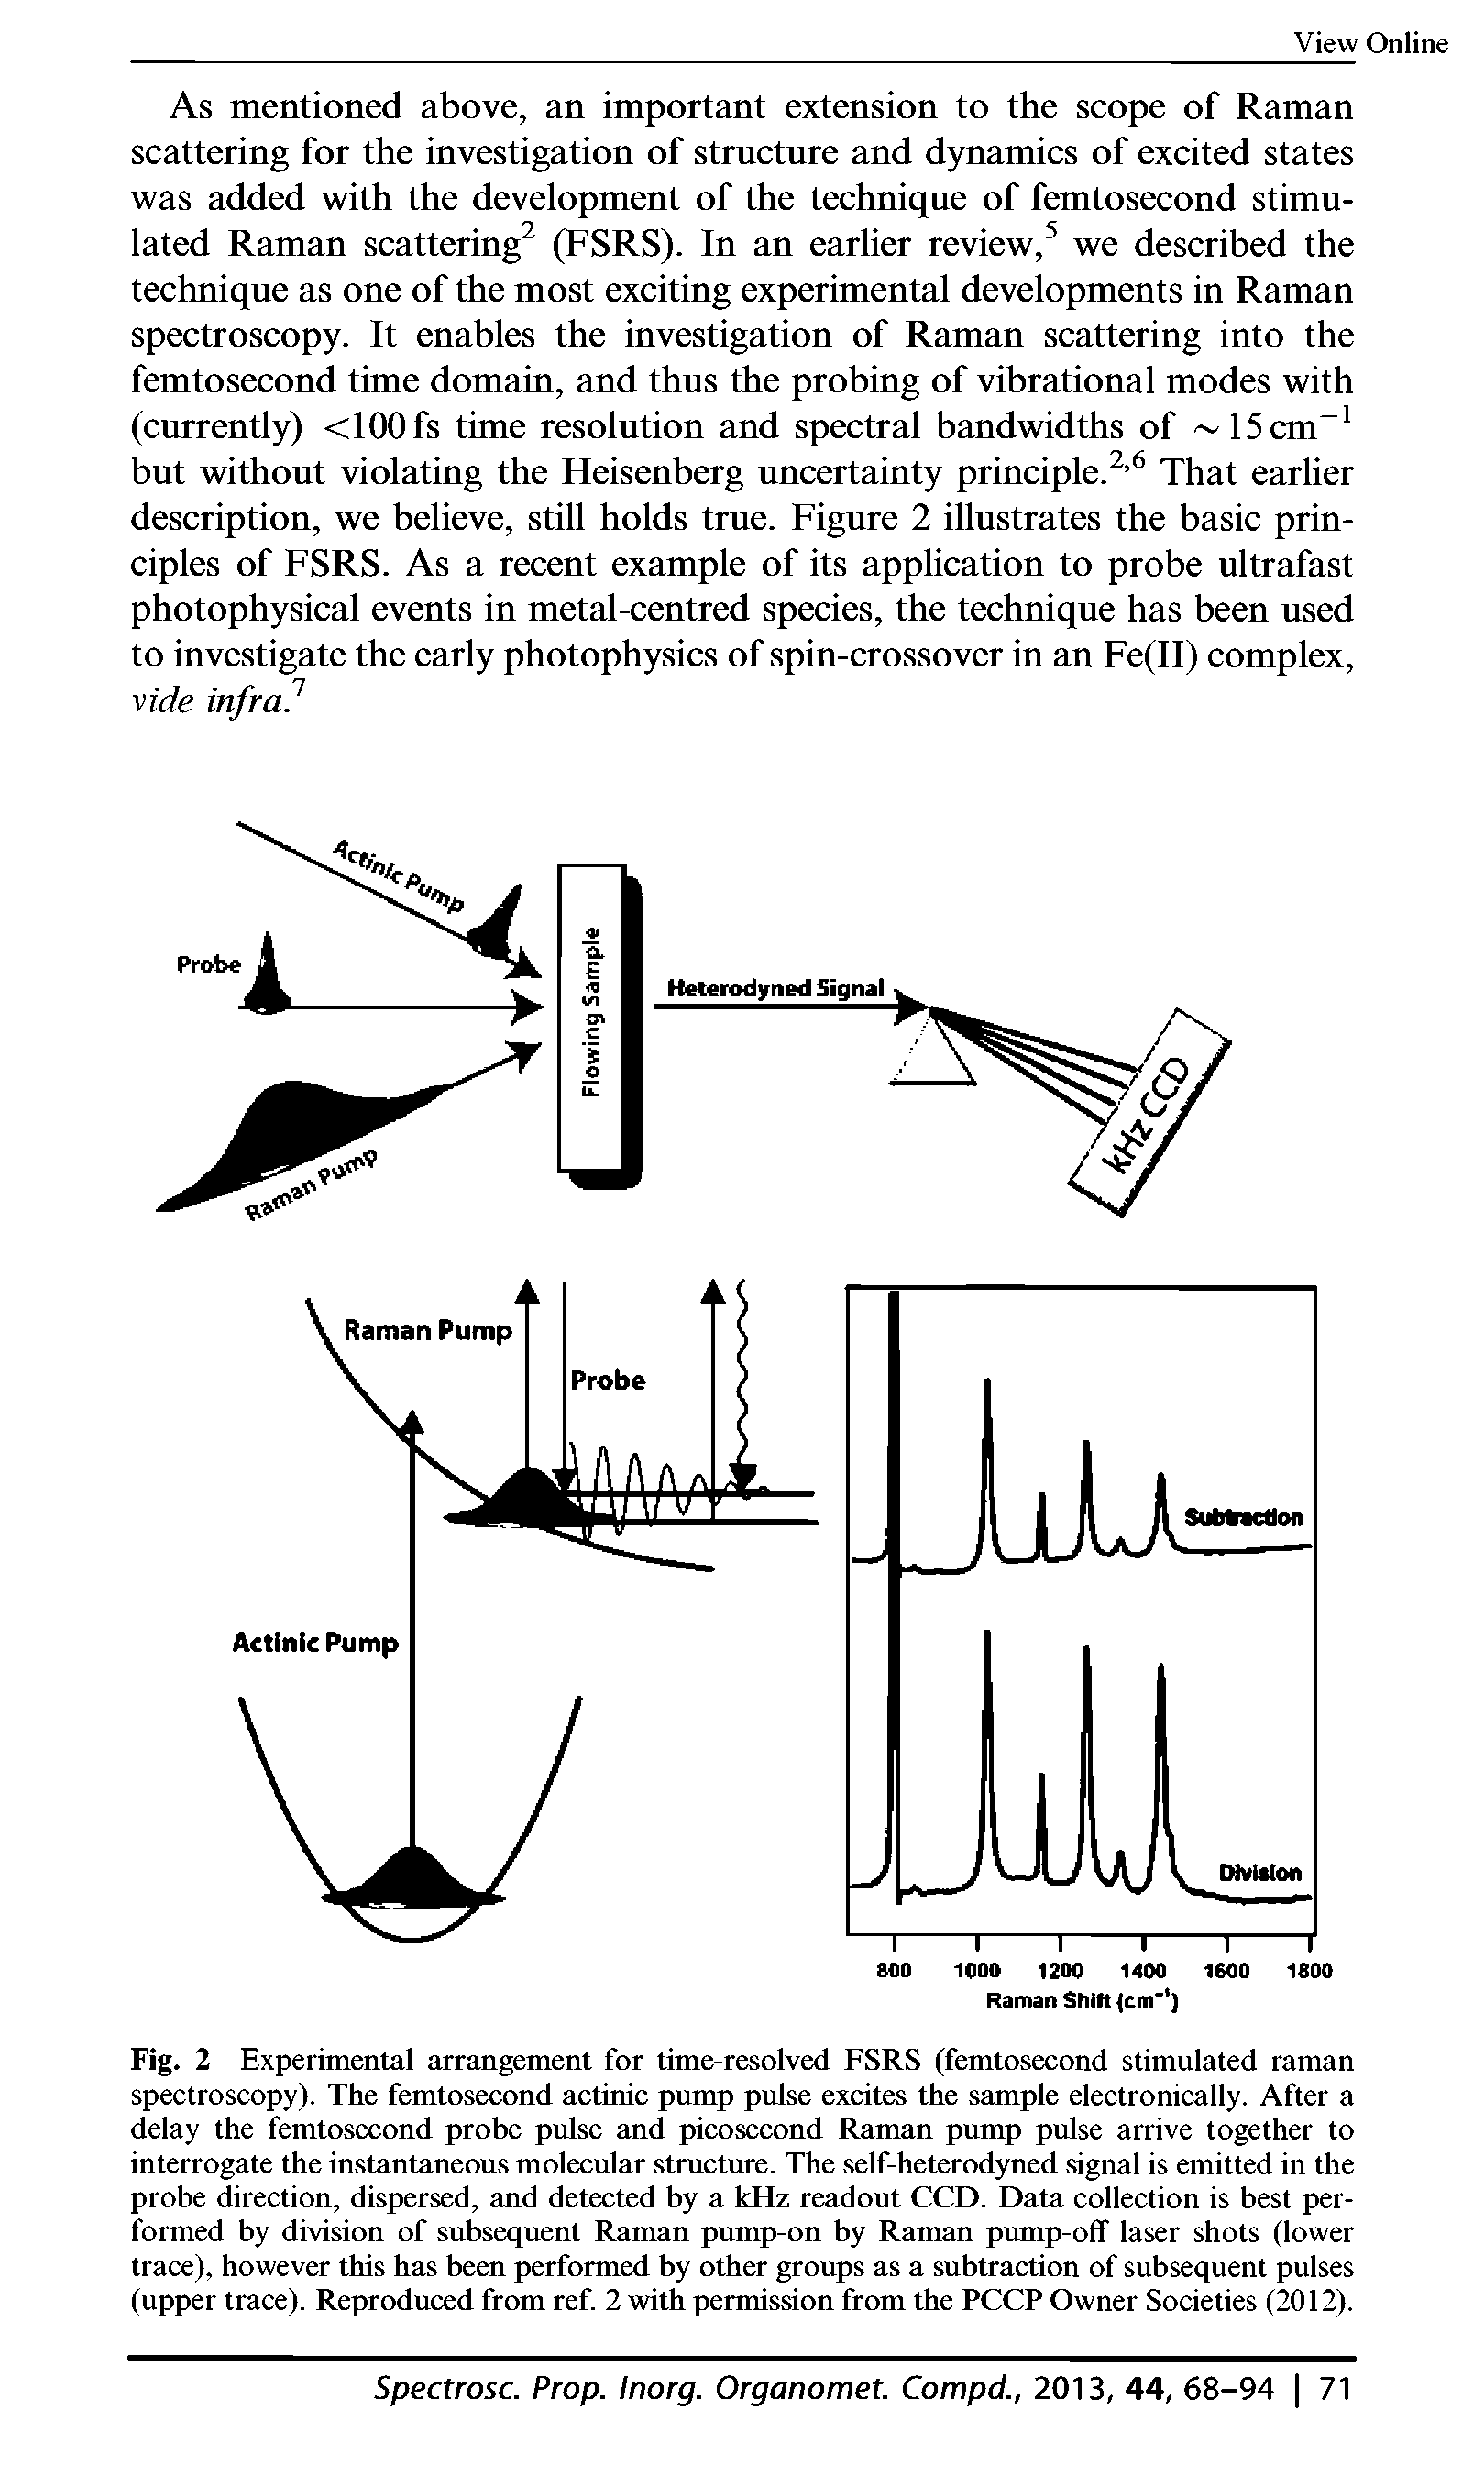 Fig. 2 Experimental arrangement for time-resolved FSRS (femtosecond stimulated raman spectroscopy). The femtosecond actinic pump pulse excites the sample electronically. After a delay the femtosecond probe pulse and picosecond Raman pump pulse arrive together to interrogate the instantaneous molecular structure. The self-heterodyned signal is emitted in the probe direction, dispersed, and detected by a kHz readout CCD. Data collection is best performed by division of subsequent Raman pump-on by Raman pump-off laser shots (lower trace), however this has been performed by other groups as a subtraction of subsequent pulses (upper trace). Reproduced from ref 2 with permission from the PCCP Owner Societies (2012).